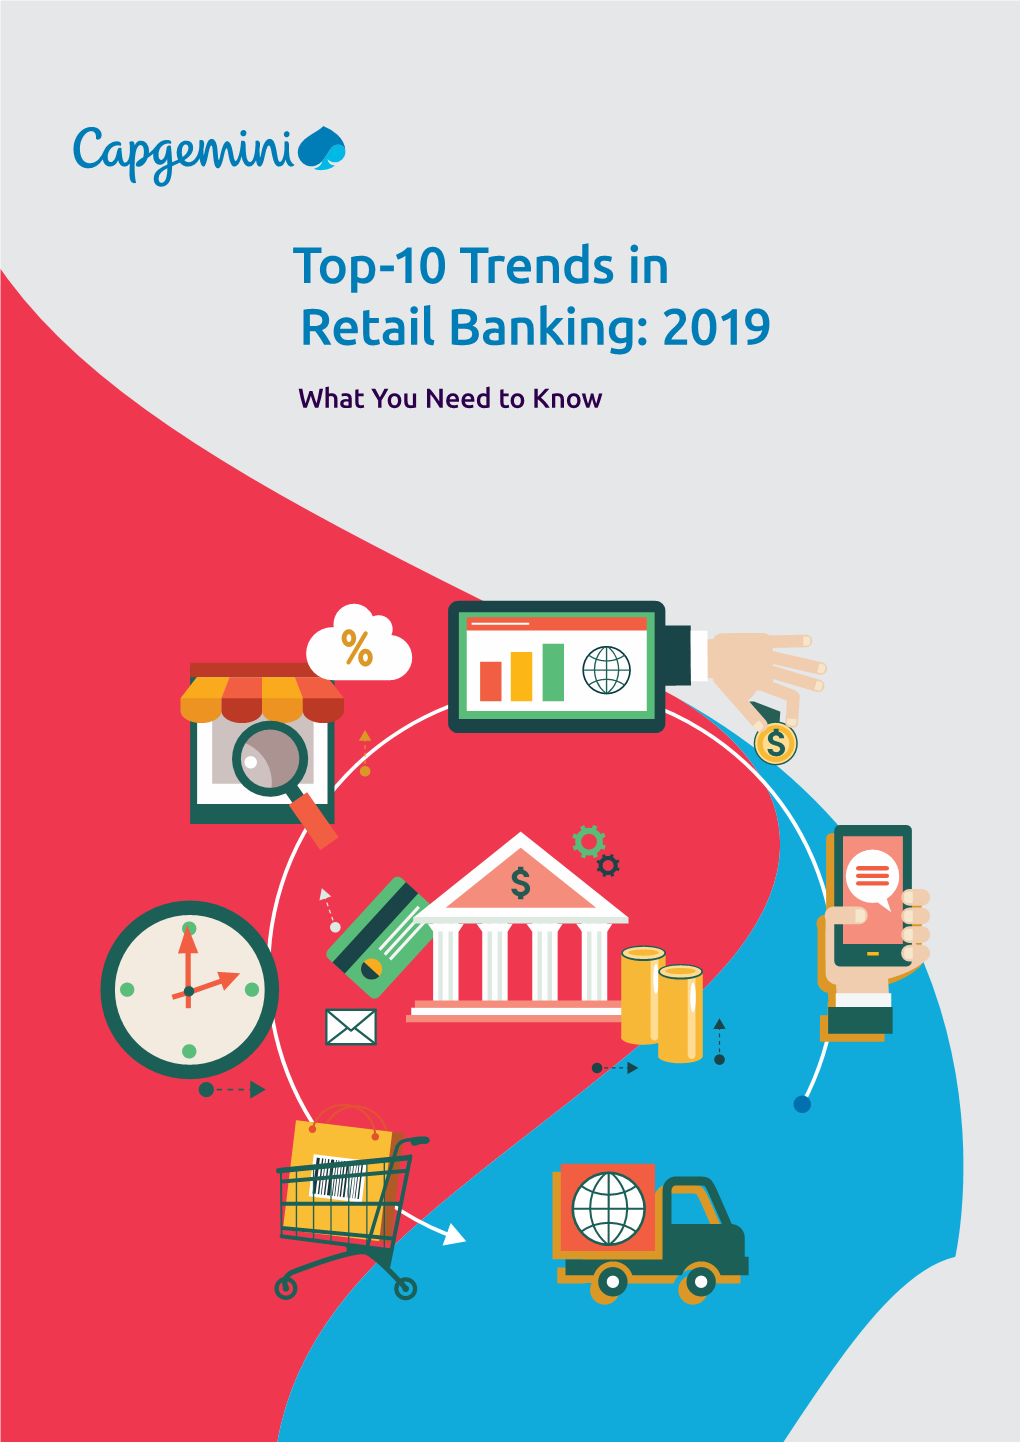 Top-10 Trends in Retail Banking: 2019